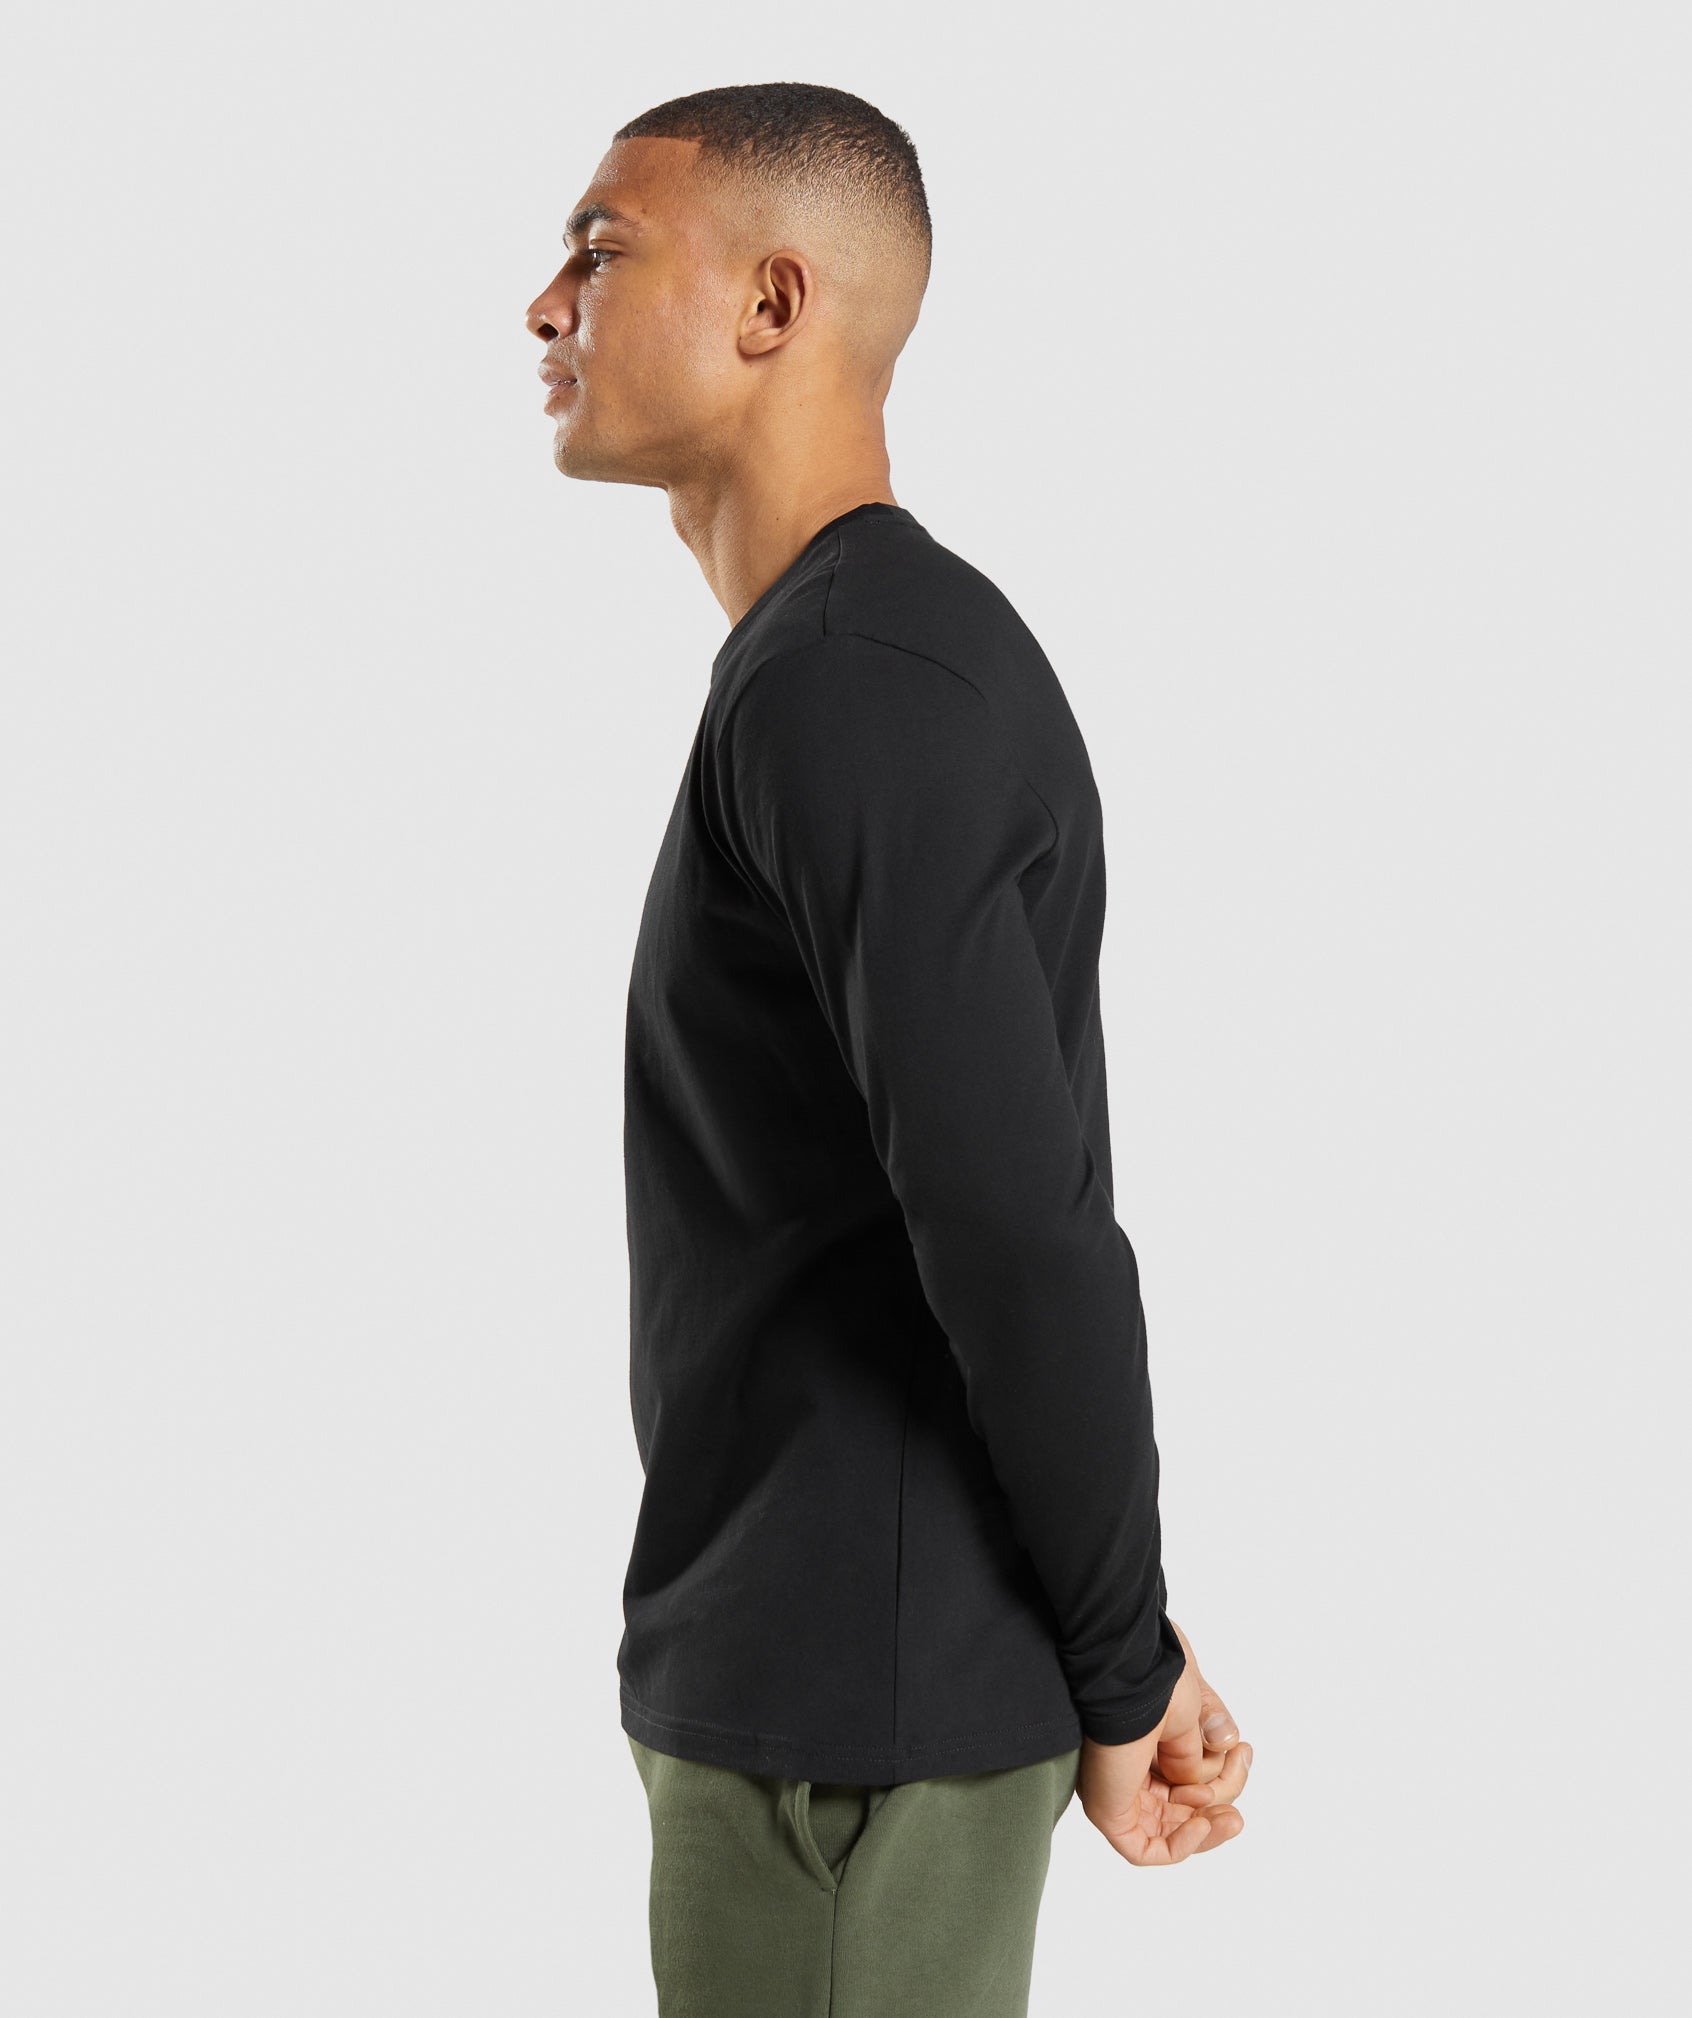 Crest Long Sleeve T-Shirt in Black - view 4